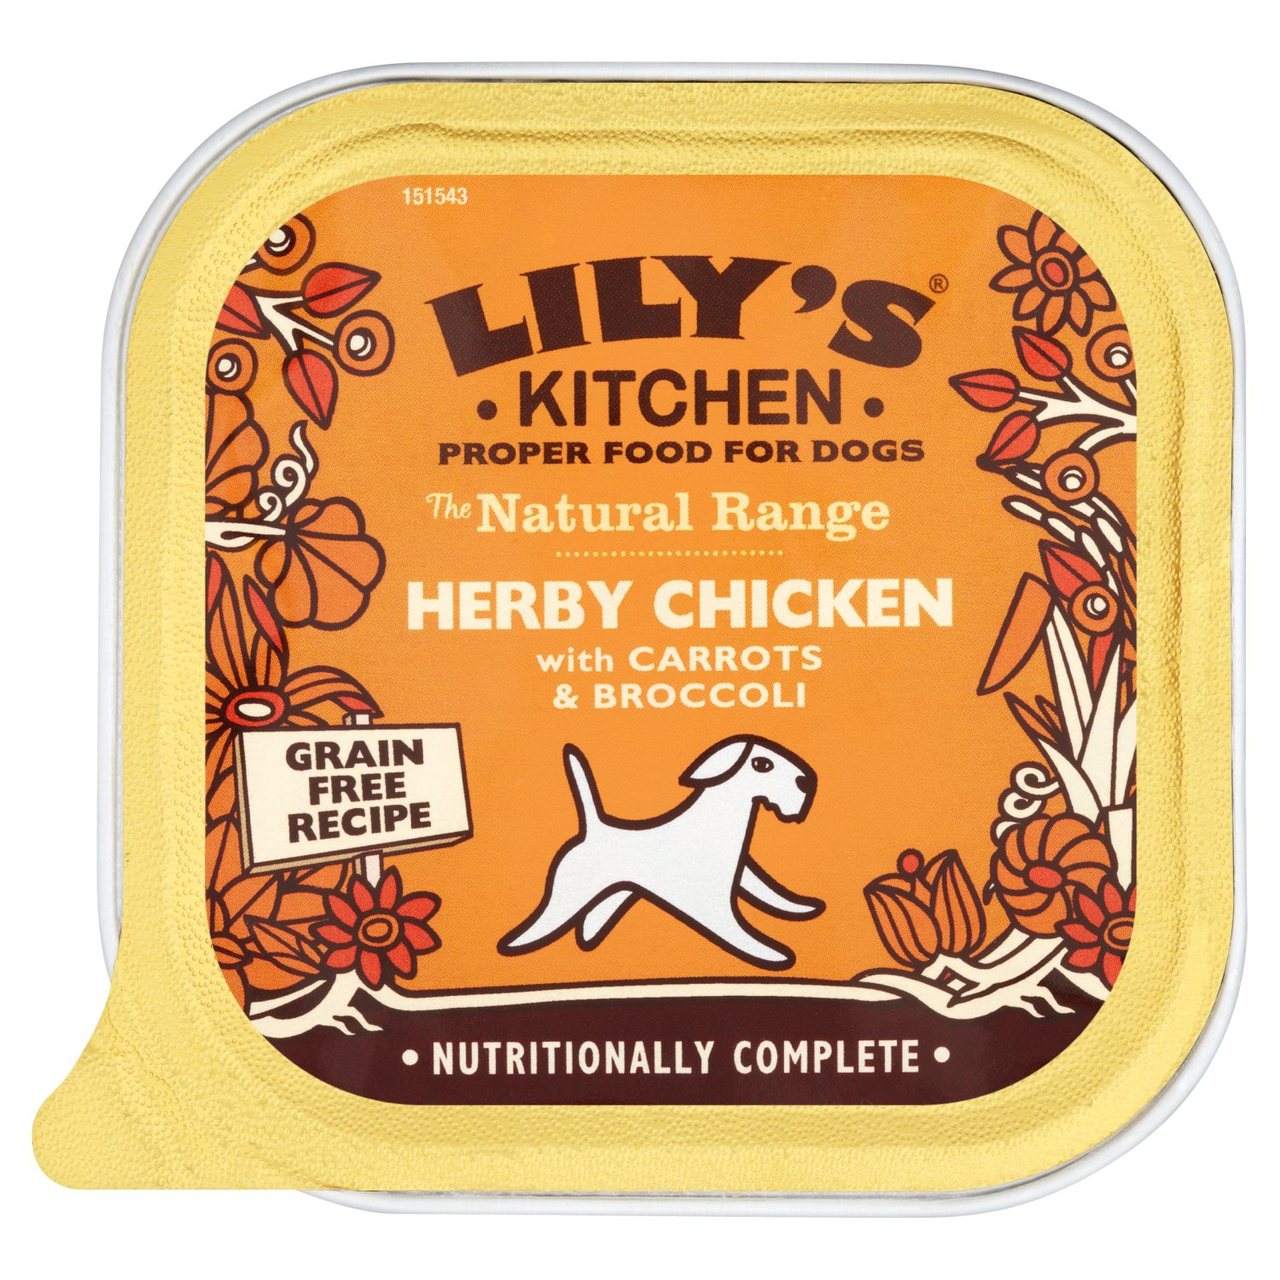 An image of Lily's Kitchen Natural Herby Chicken with Carrots & Broccoli for Dogs